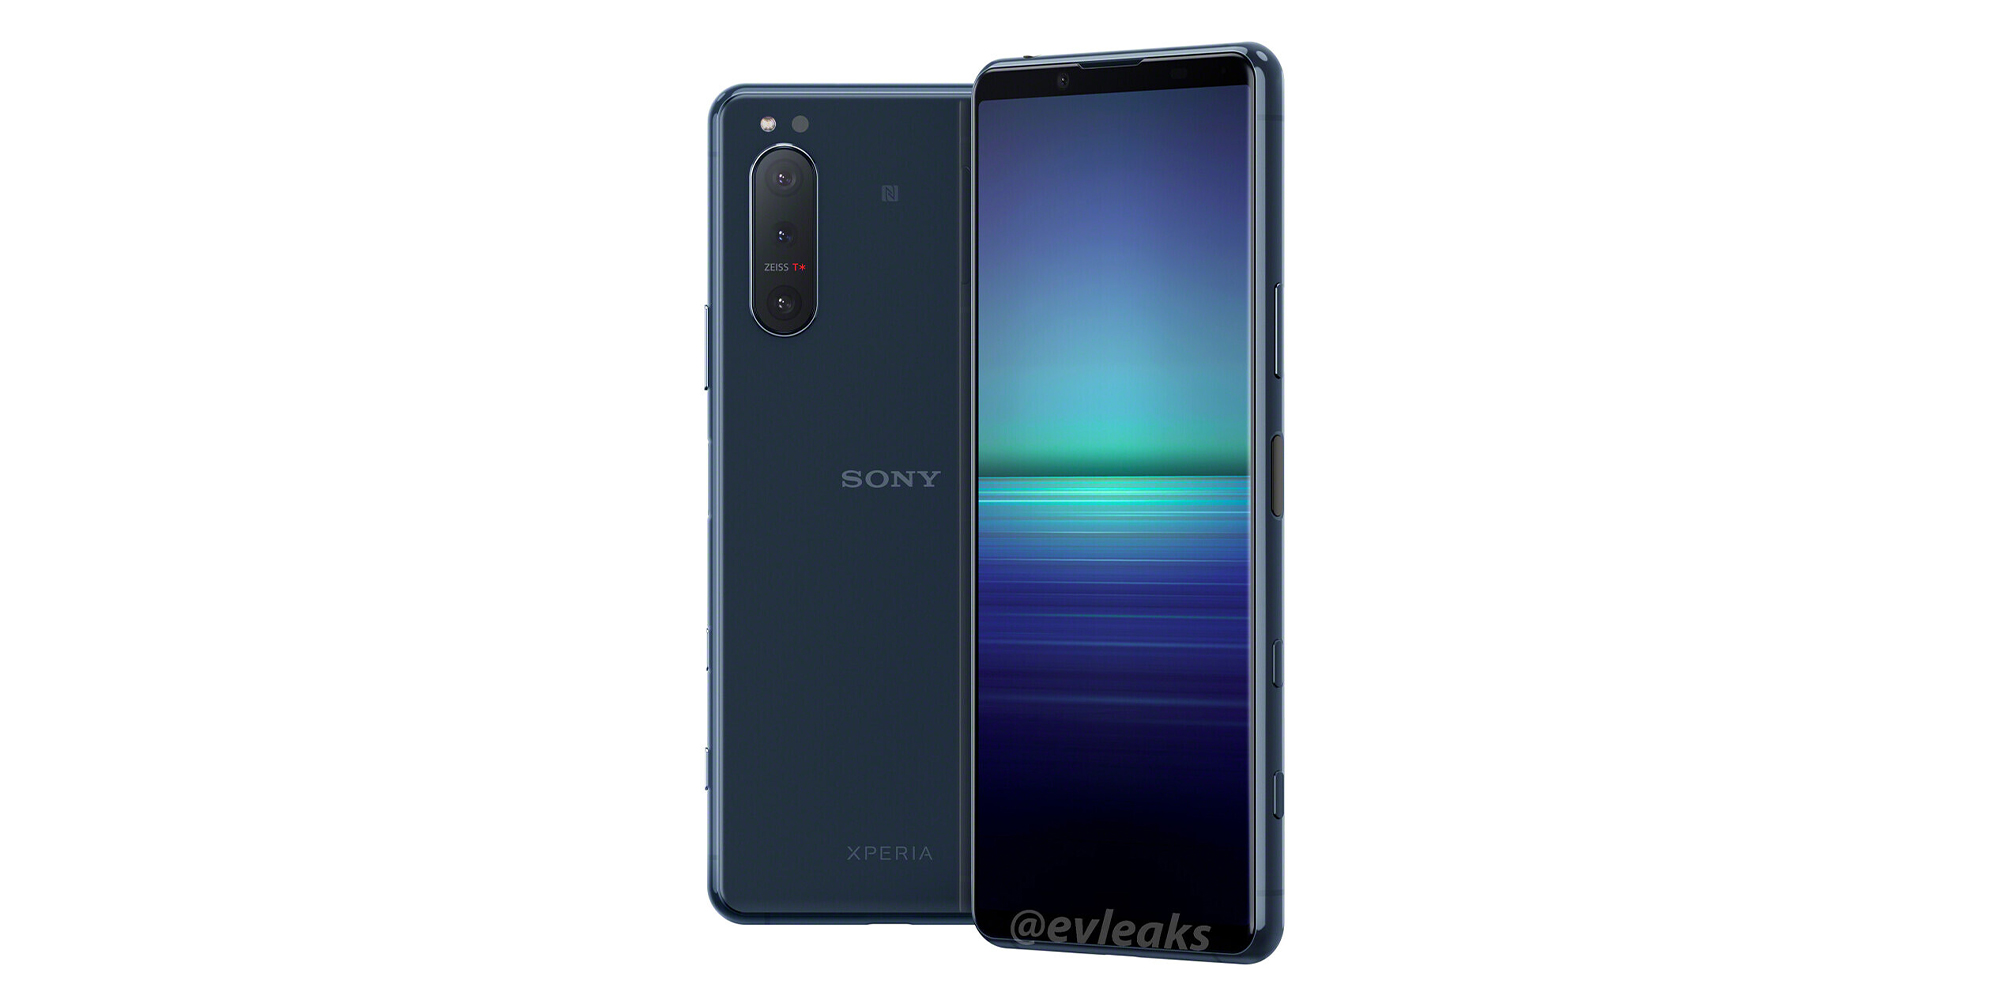 Sony Xperia 5 II press render leaks showing refined design - 9to5Google